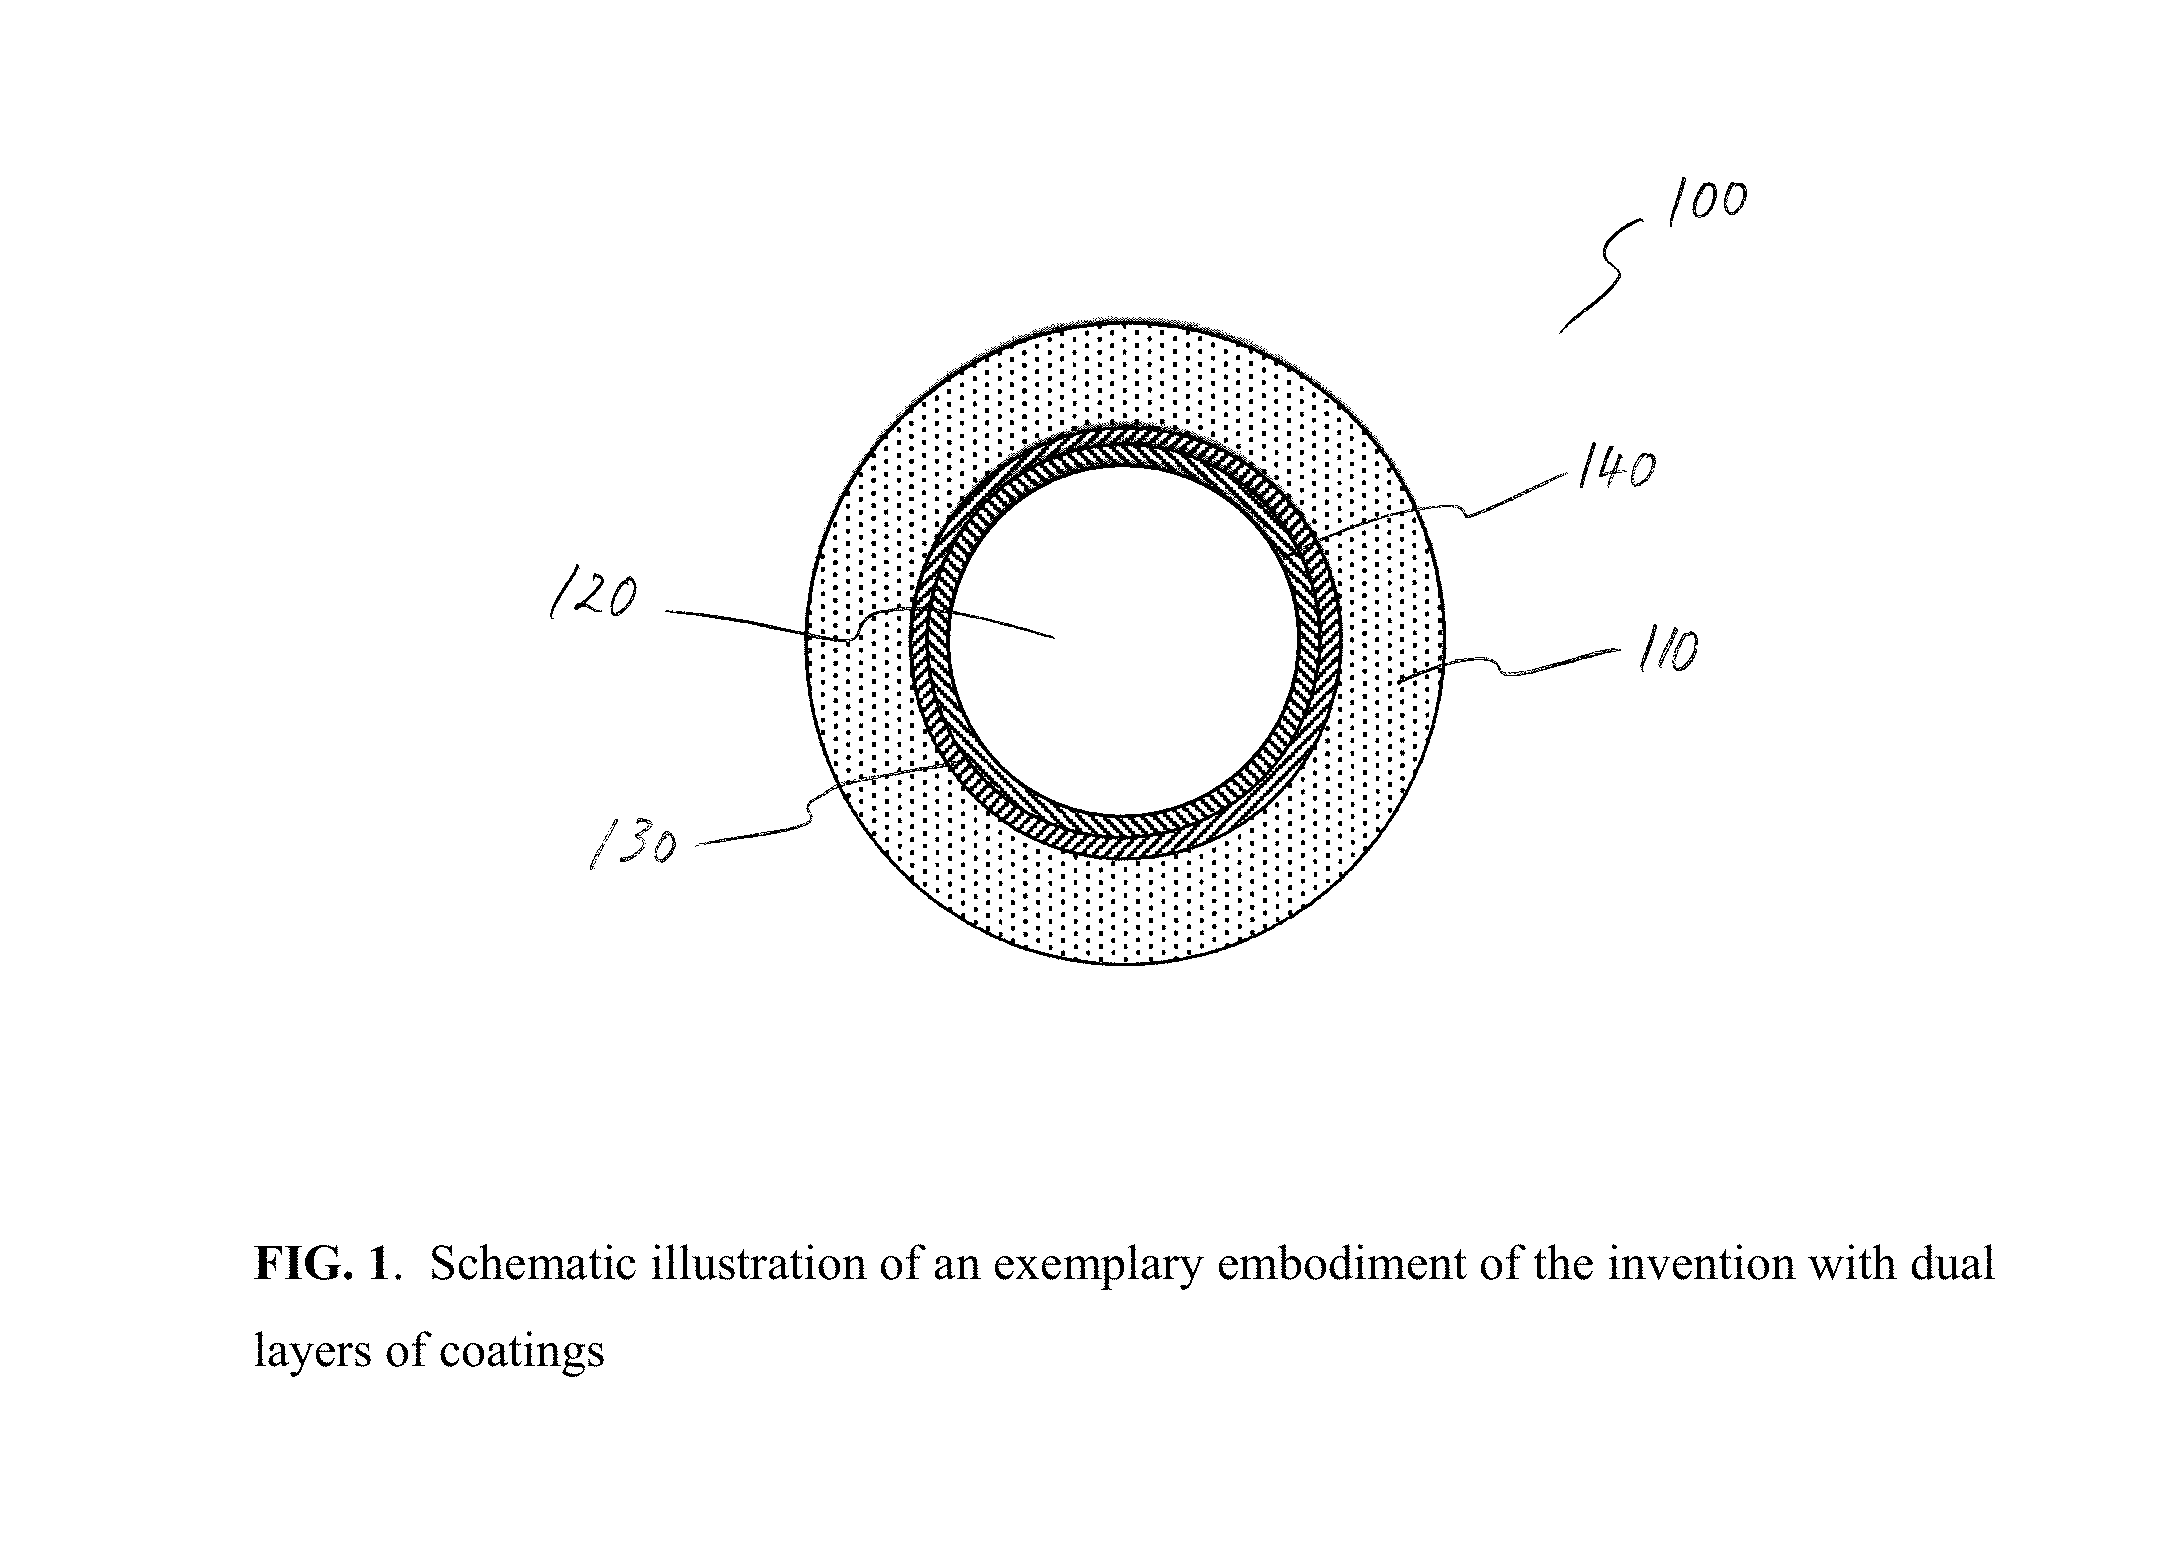 Metal components with inert vapor phase coating on internal surfaces